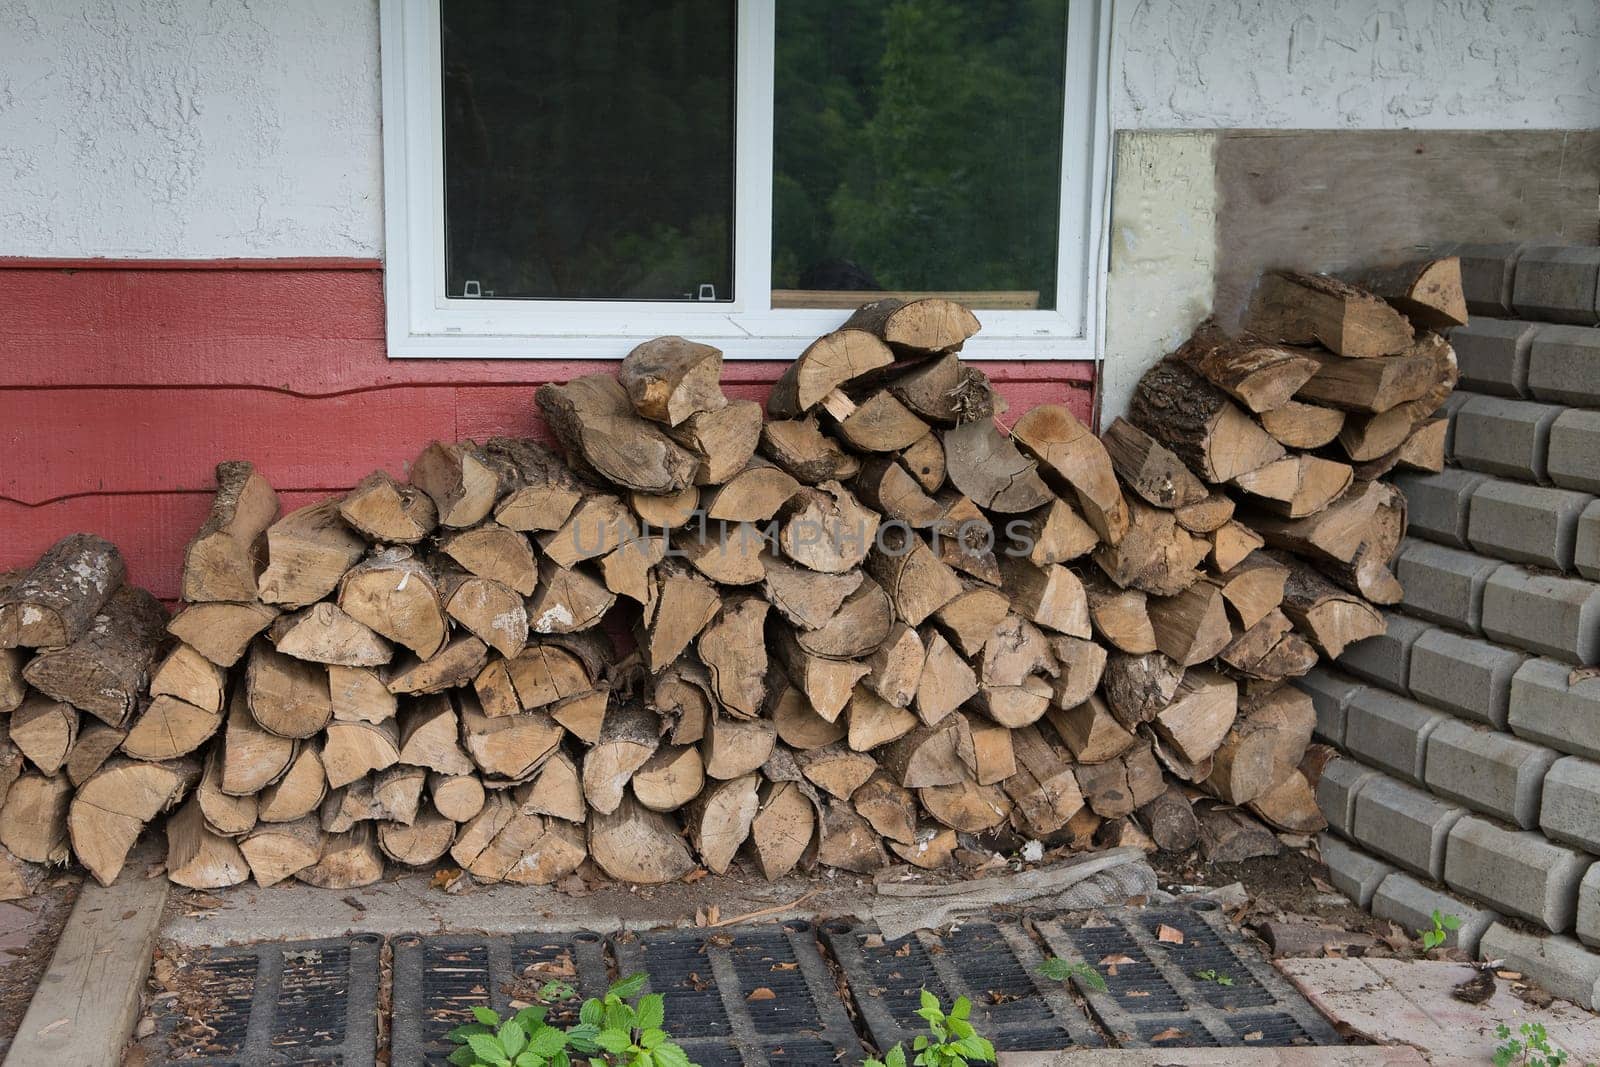 Wood prepared for kindling a fireplace in a country house